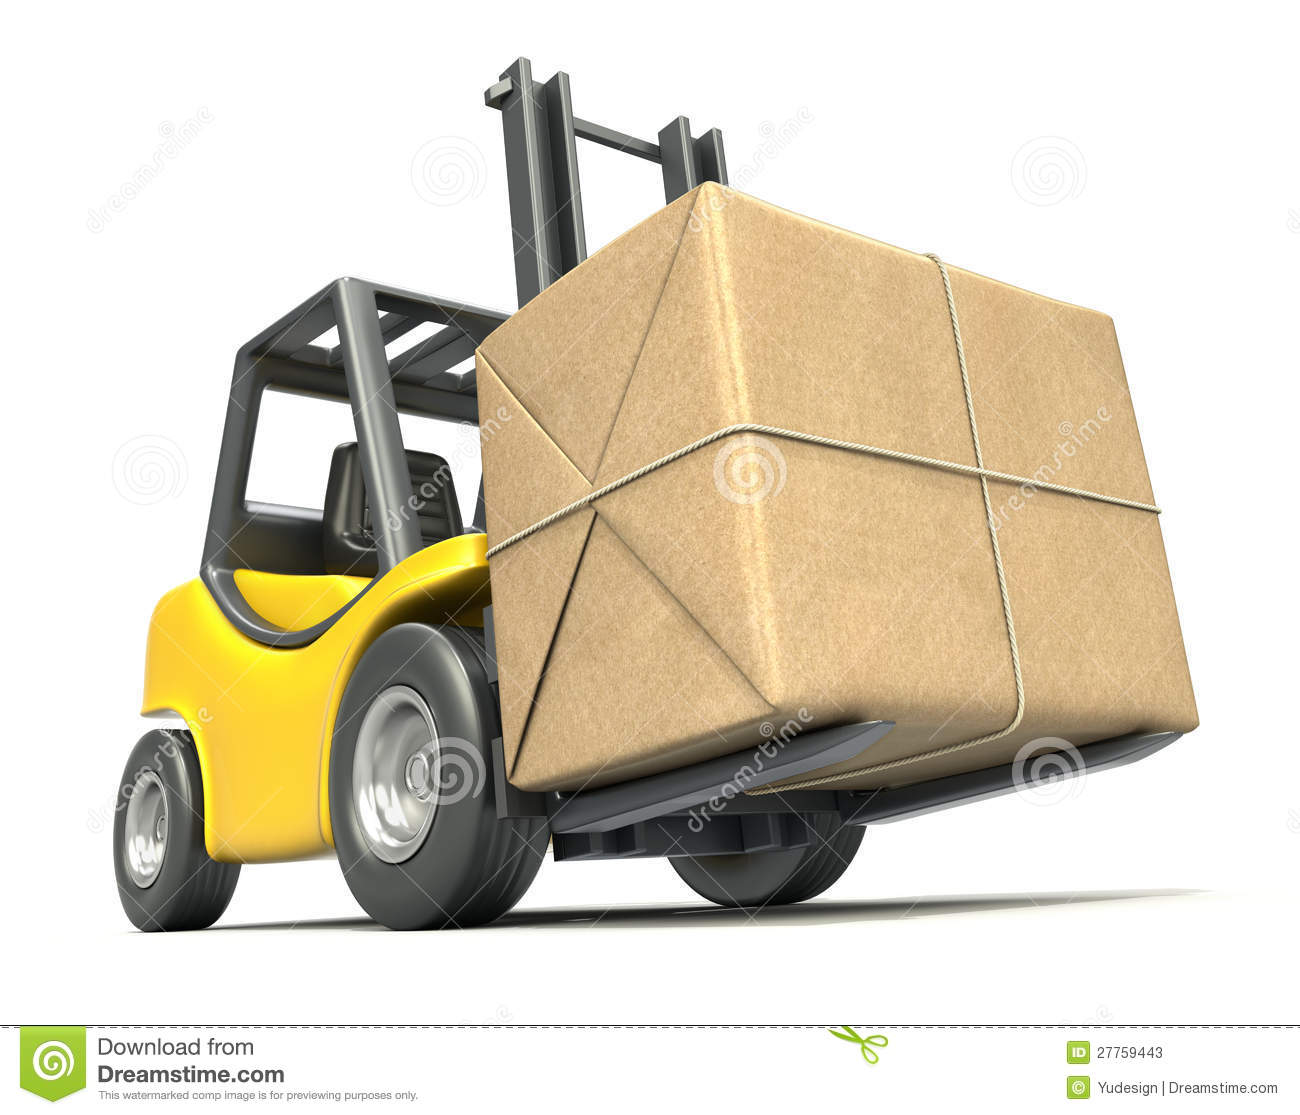 Forklift With Post Package Stock Photos   Image  27759443